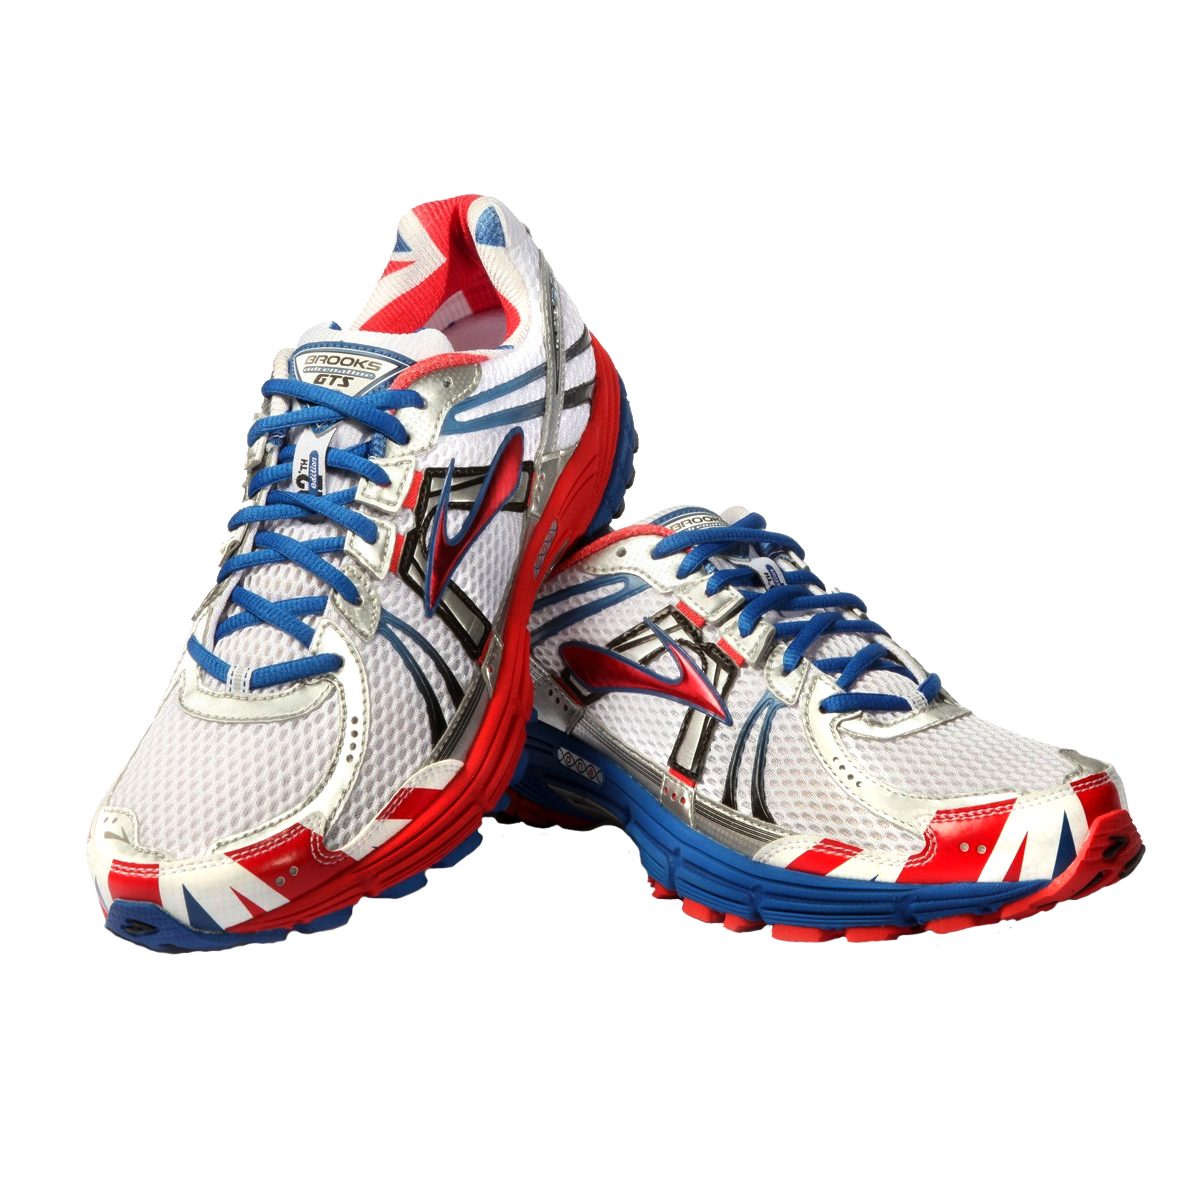 Png Running Shoes - Running Shoes Png Image, Transparent background PNG HD thumbnail